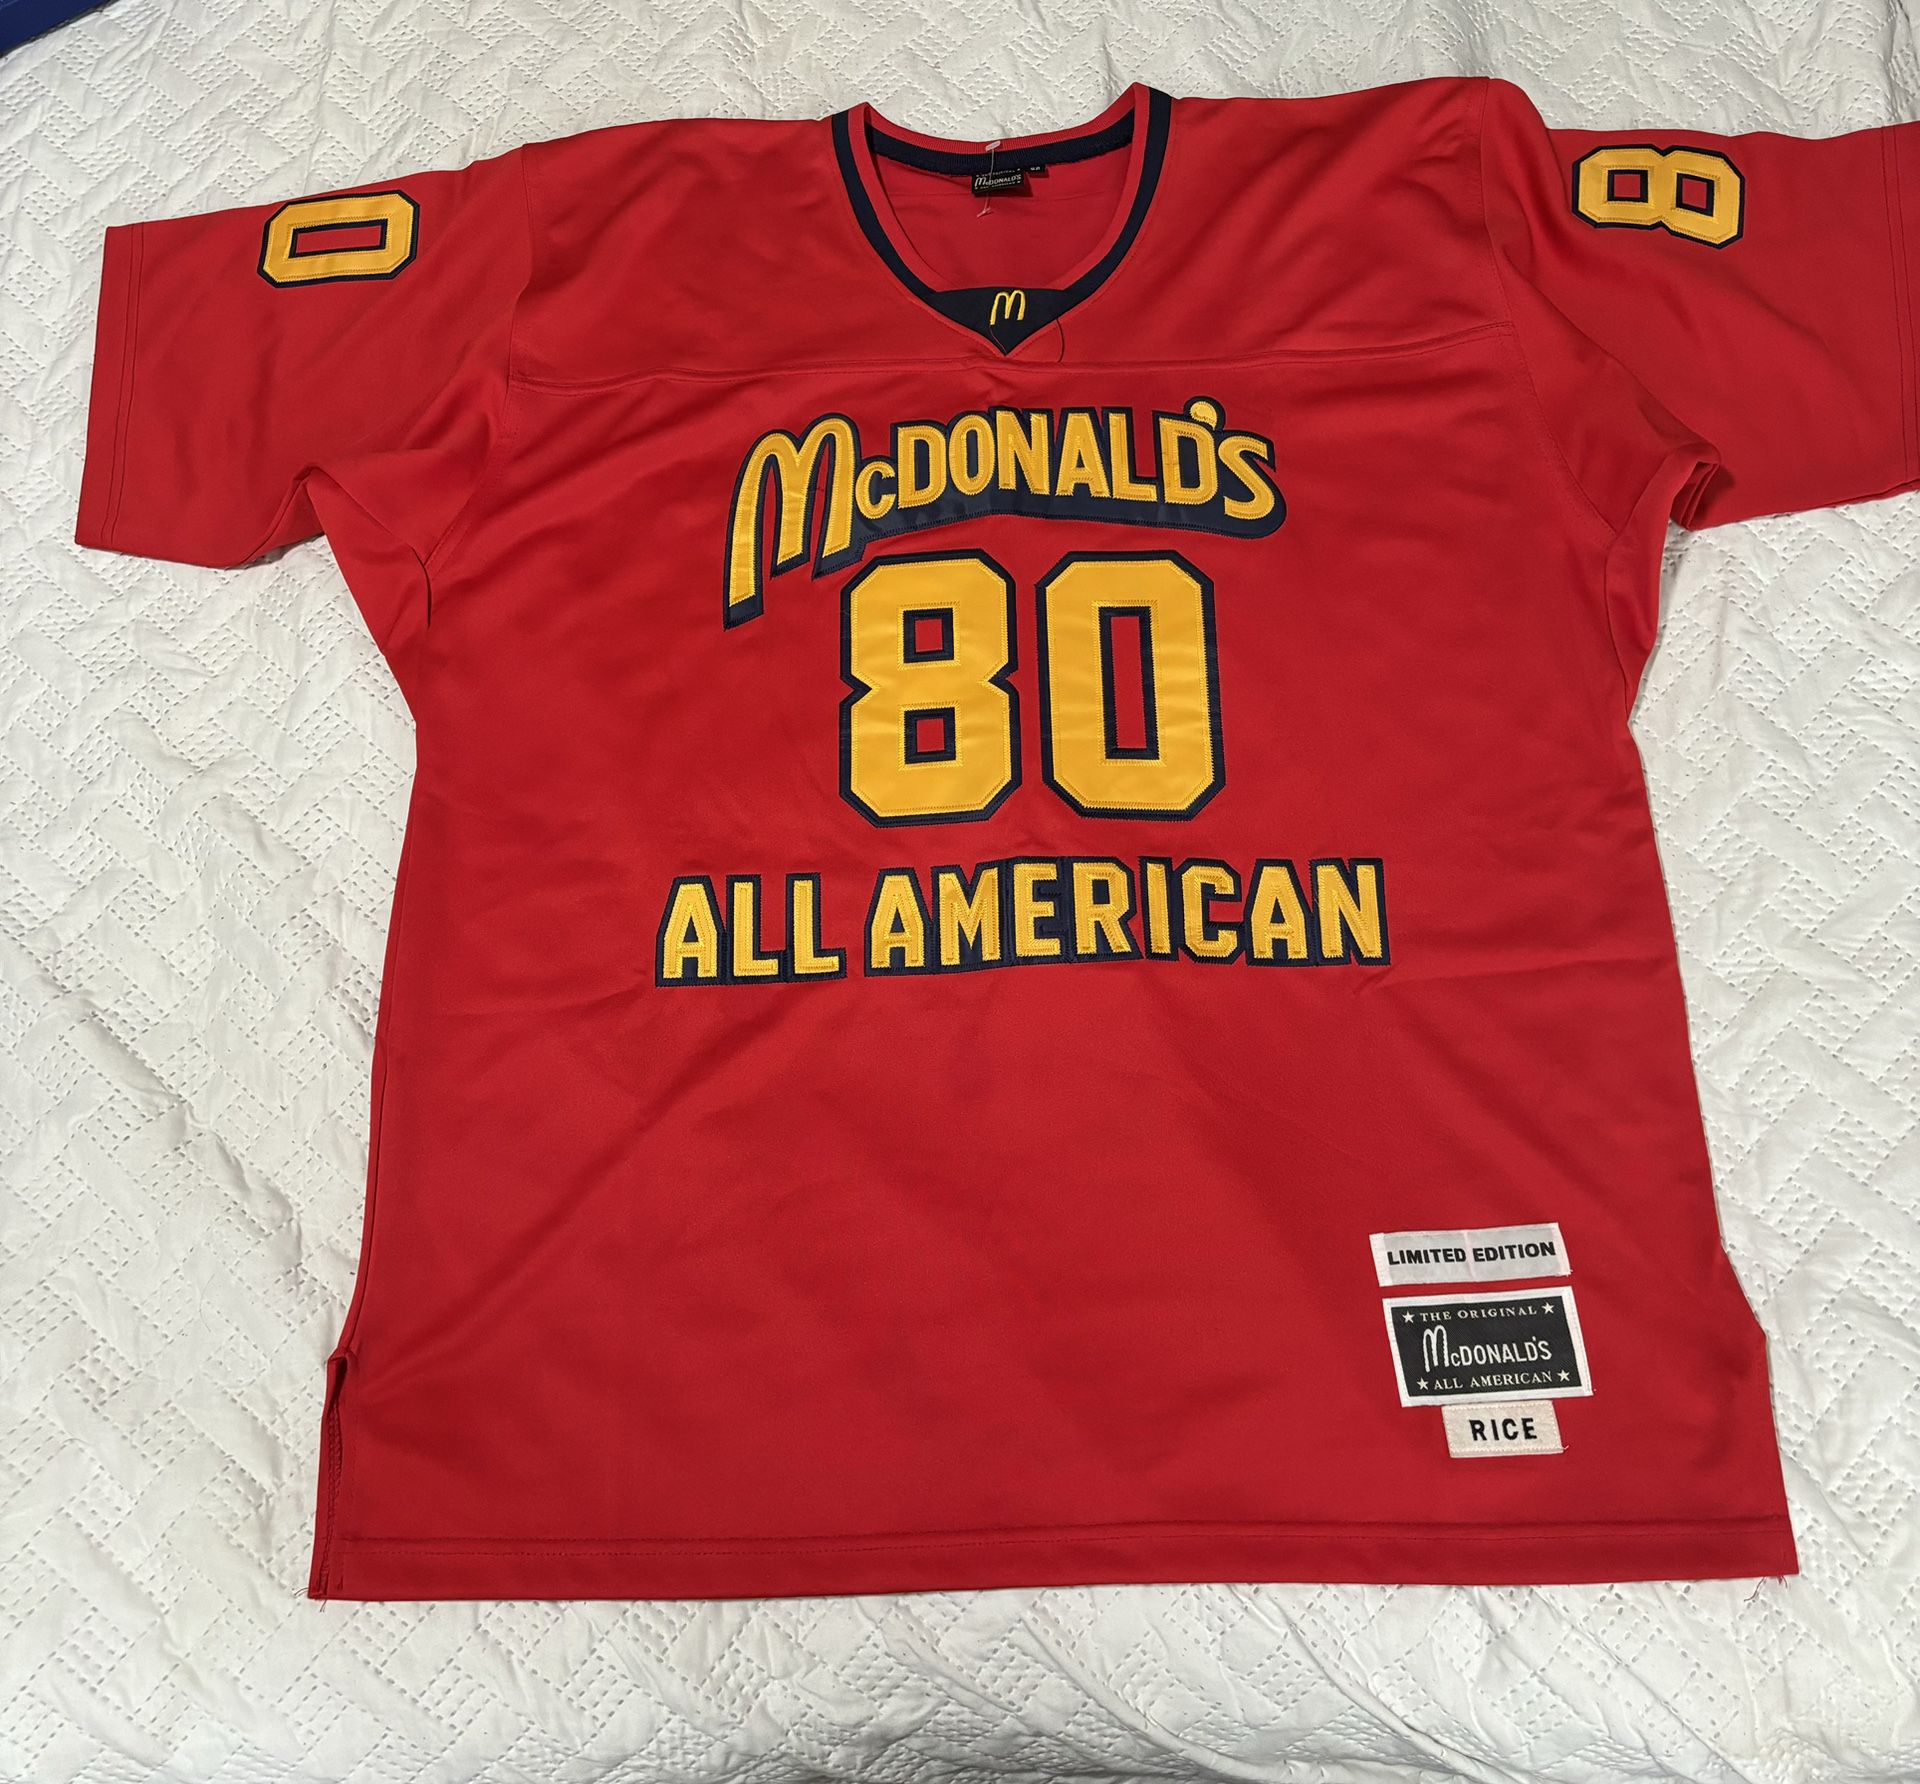 McDonald’s ALL American JERRY RICE JERSEY